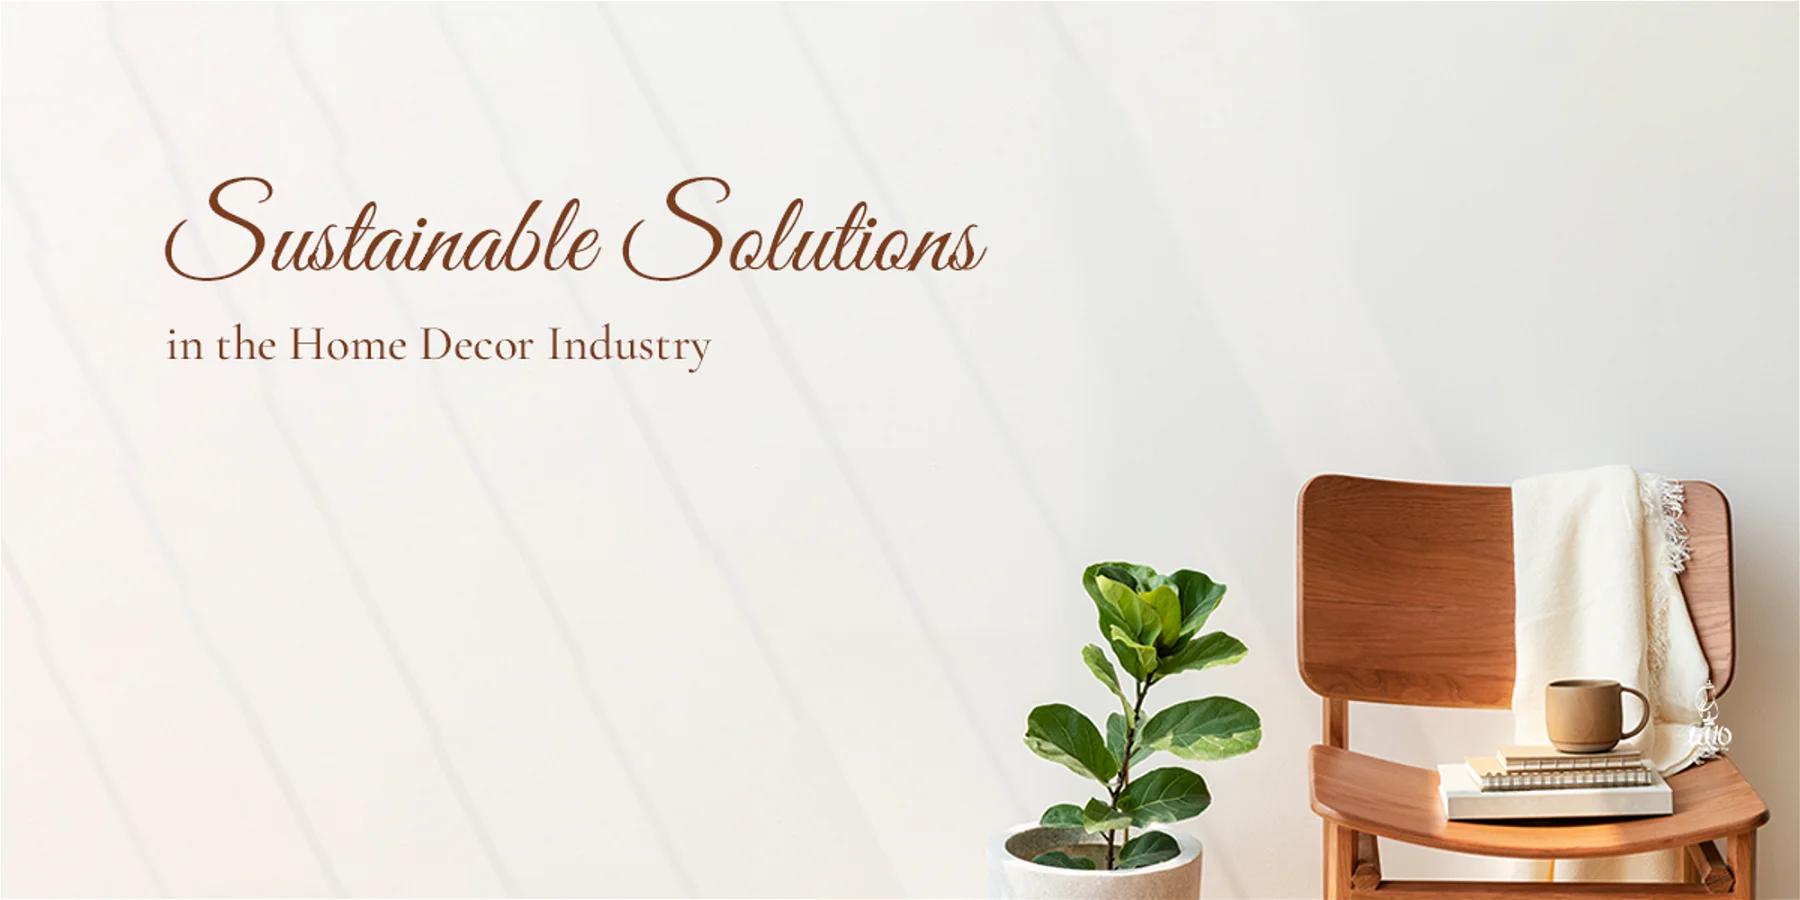 (Sustainable (Selutions

in the Home Decor Industry